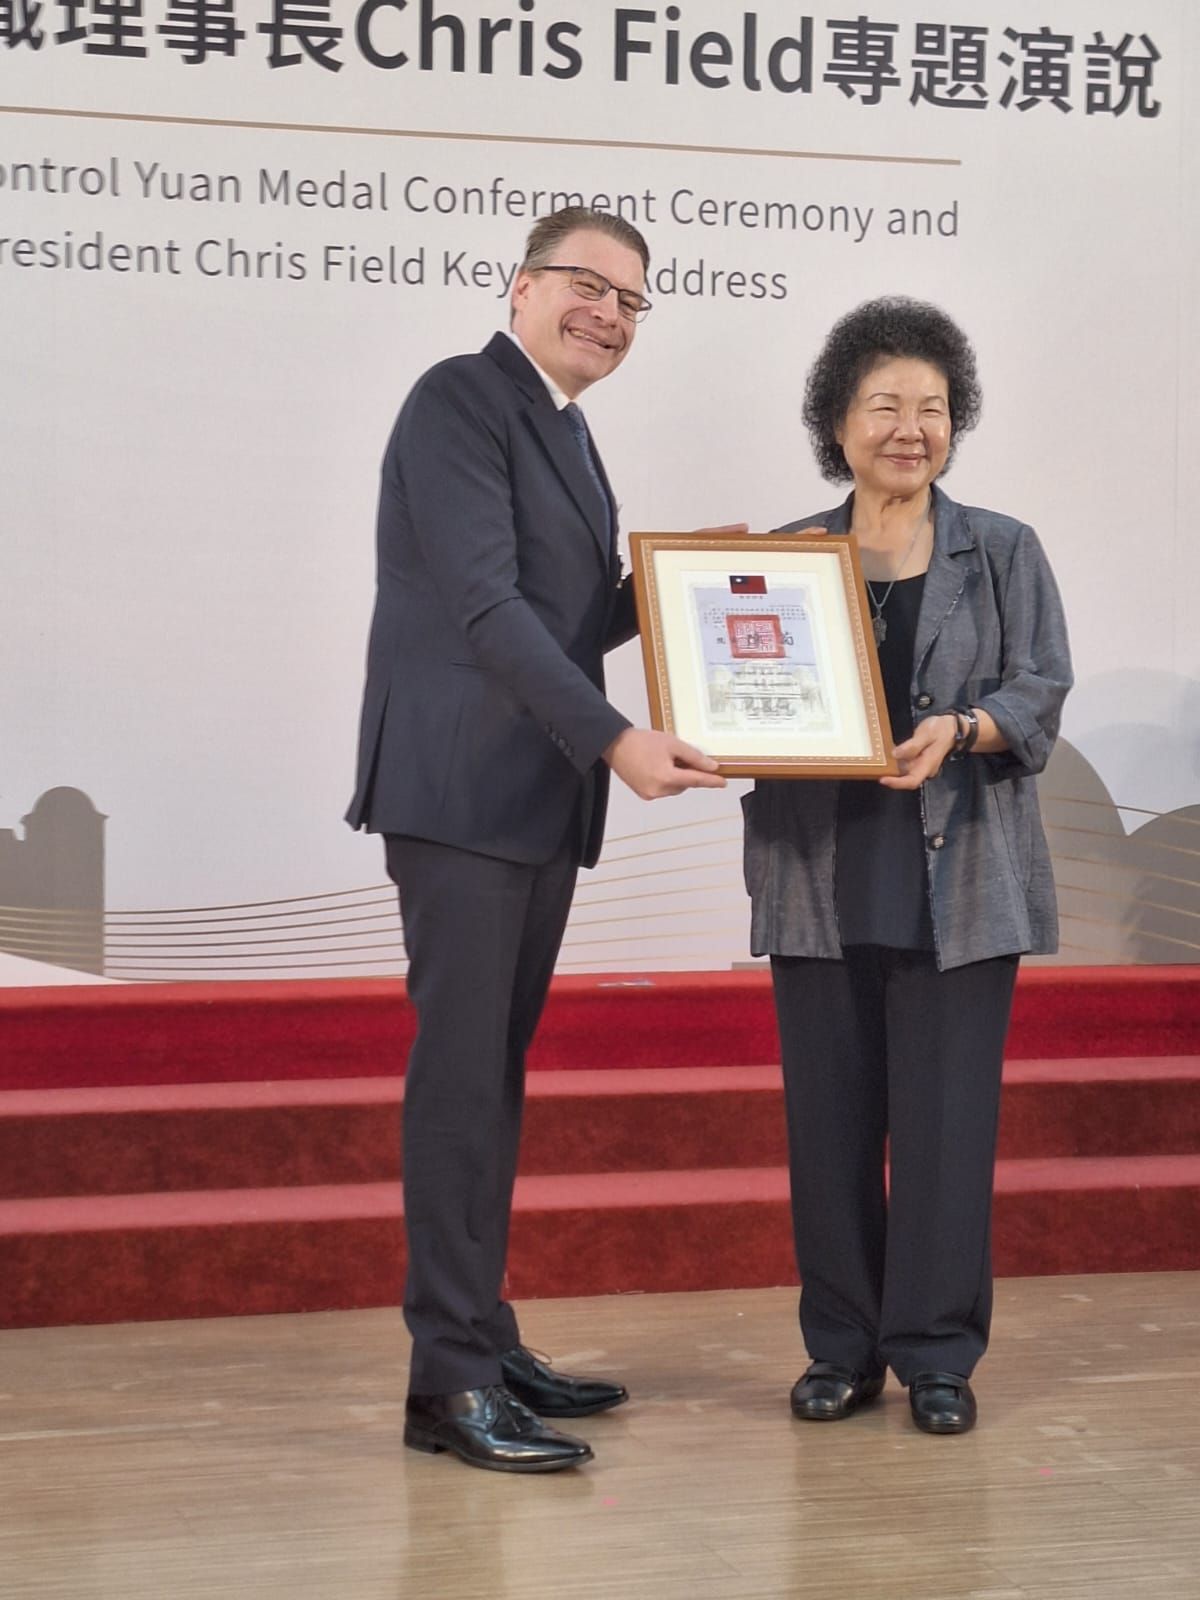 IOI President Chris Field PSM being awarded the First Grade Medal by Control Yuan President Chen Chu